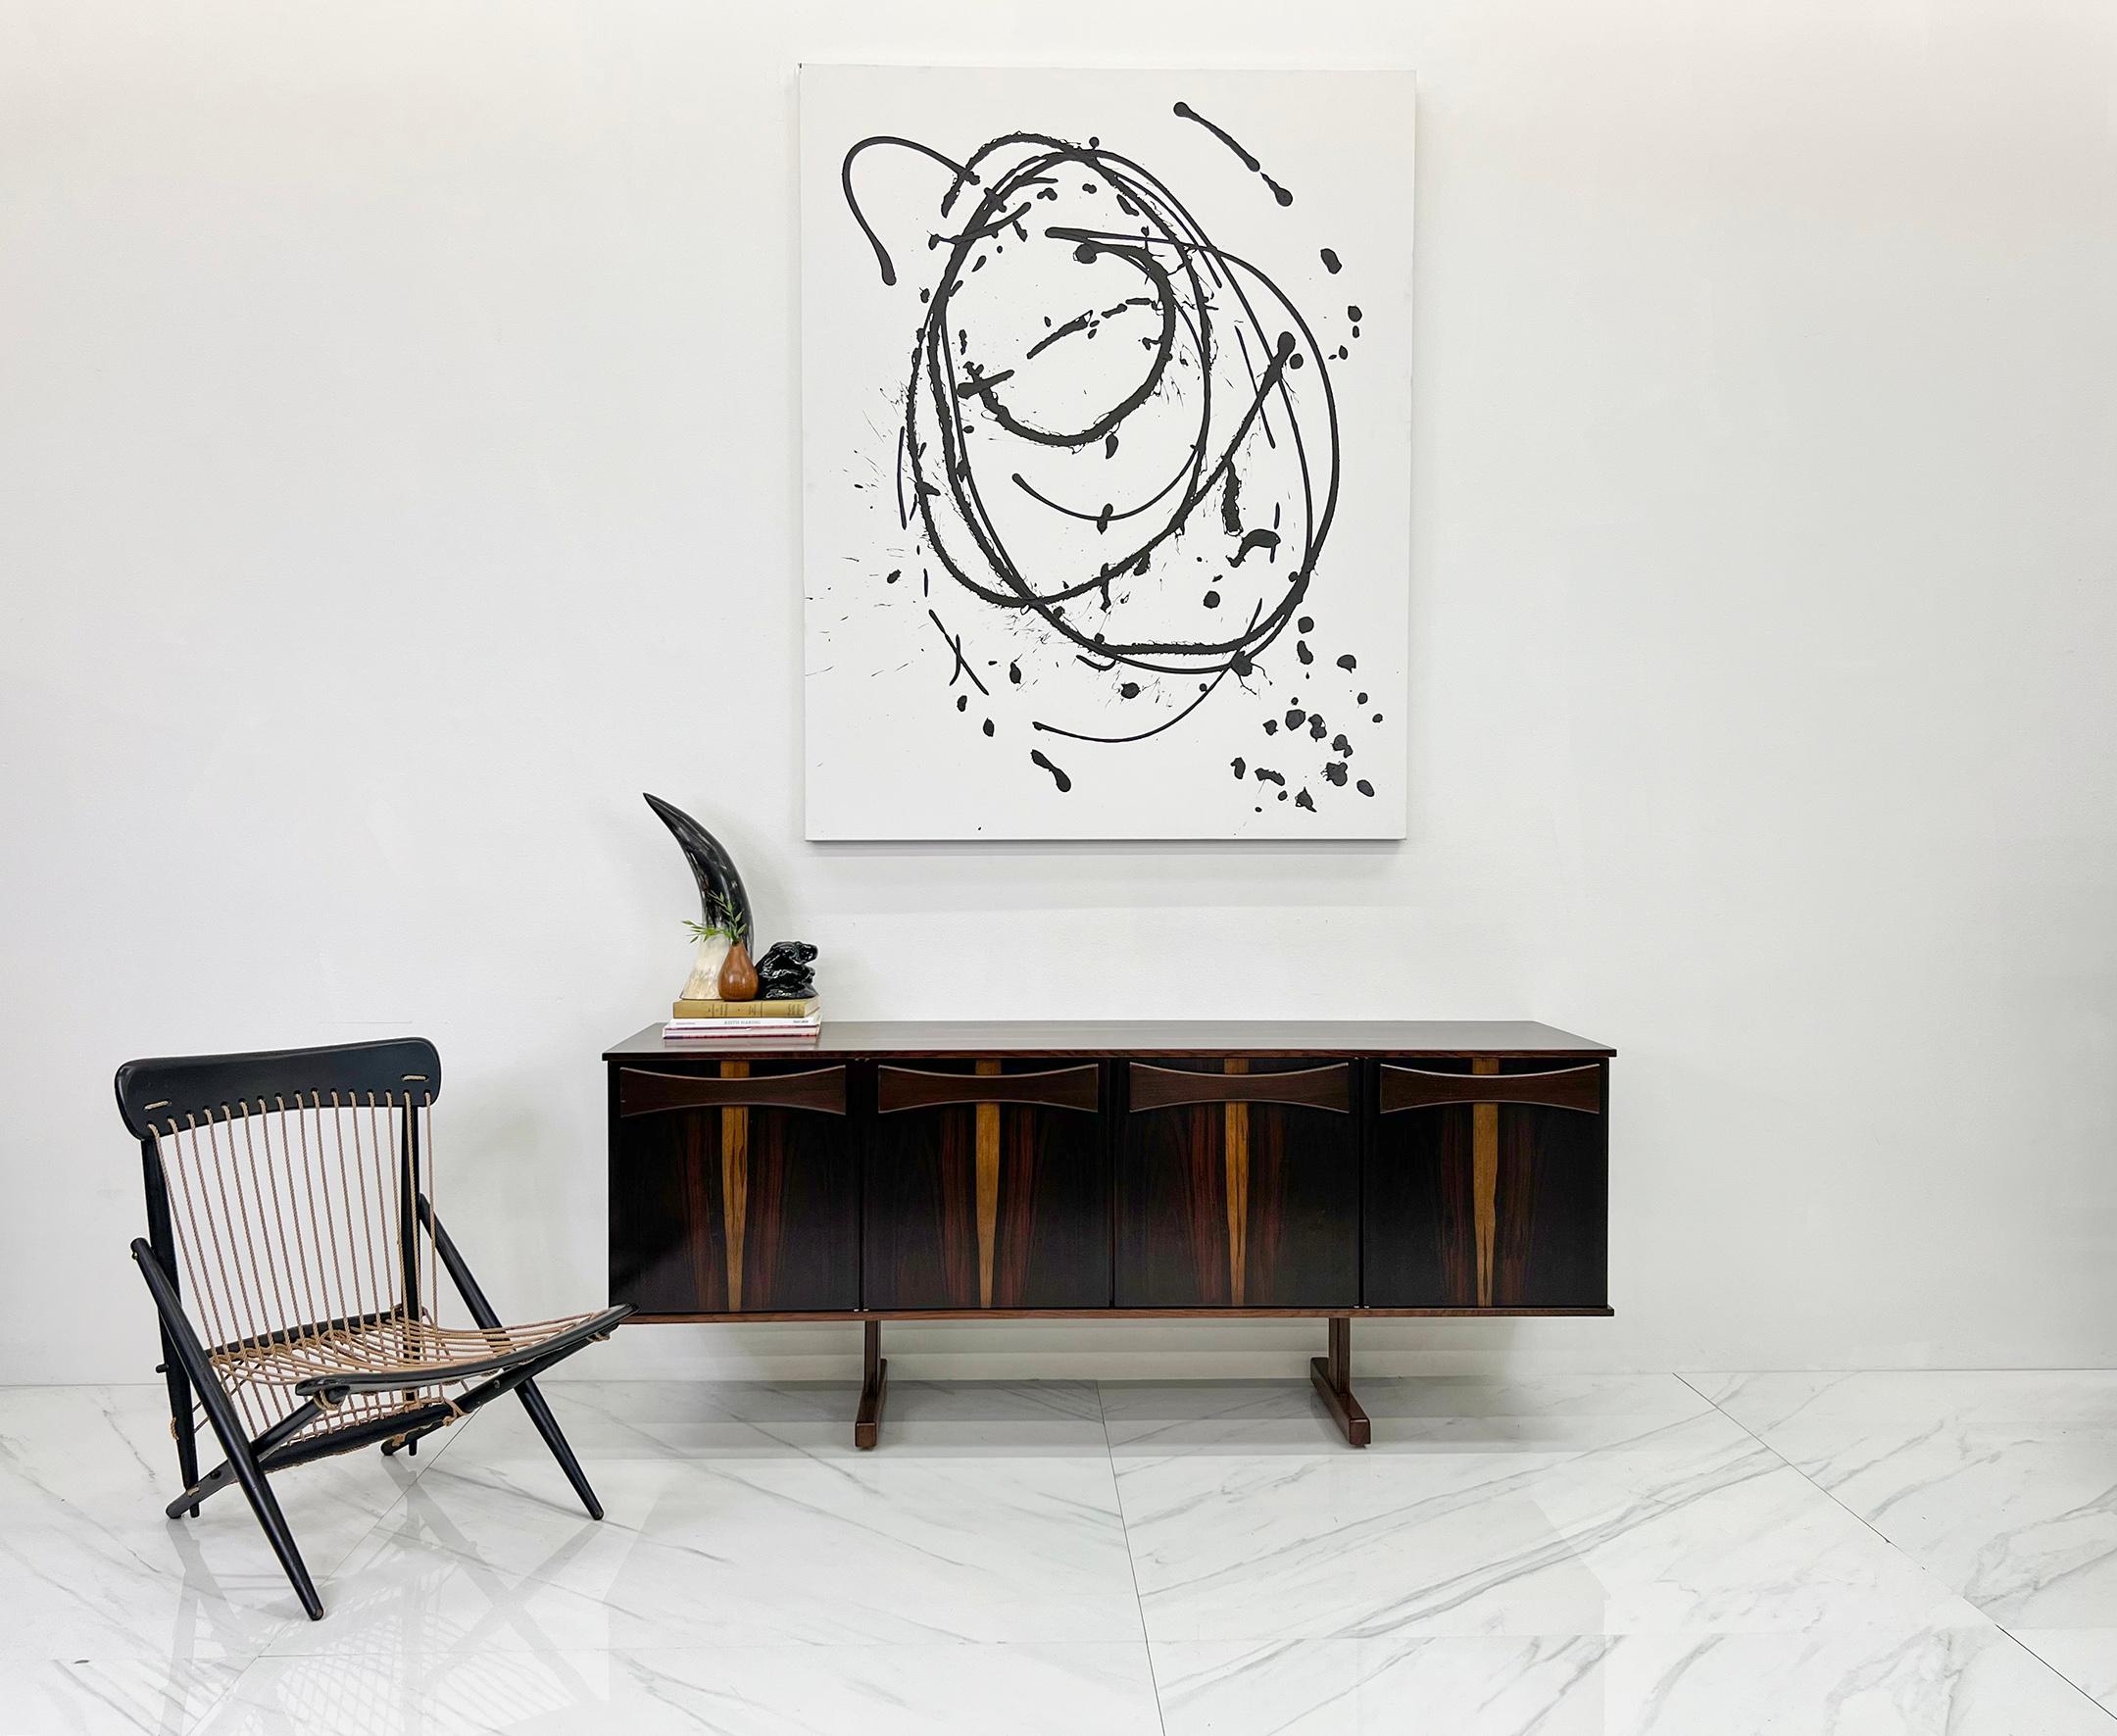 This piece is stunning! Designed by the renowned Brazilian furniture designer, Jorge Zalszupin for renowned Brazilian furniture manufacturer JD Móveis e Decorações, this credenza / sideboard demands attention. Crafted with meticulous attention to